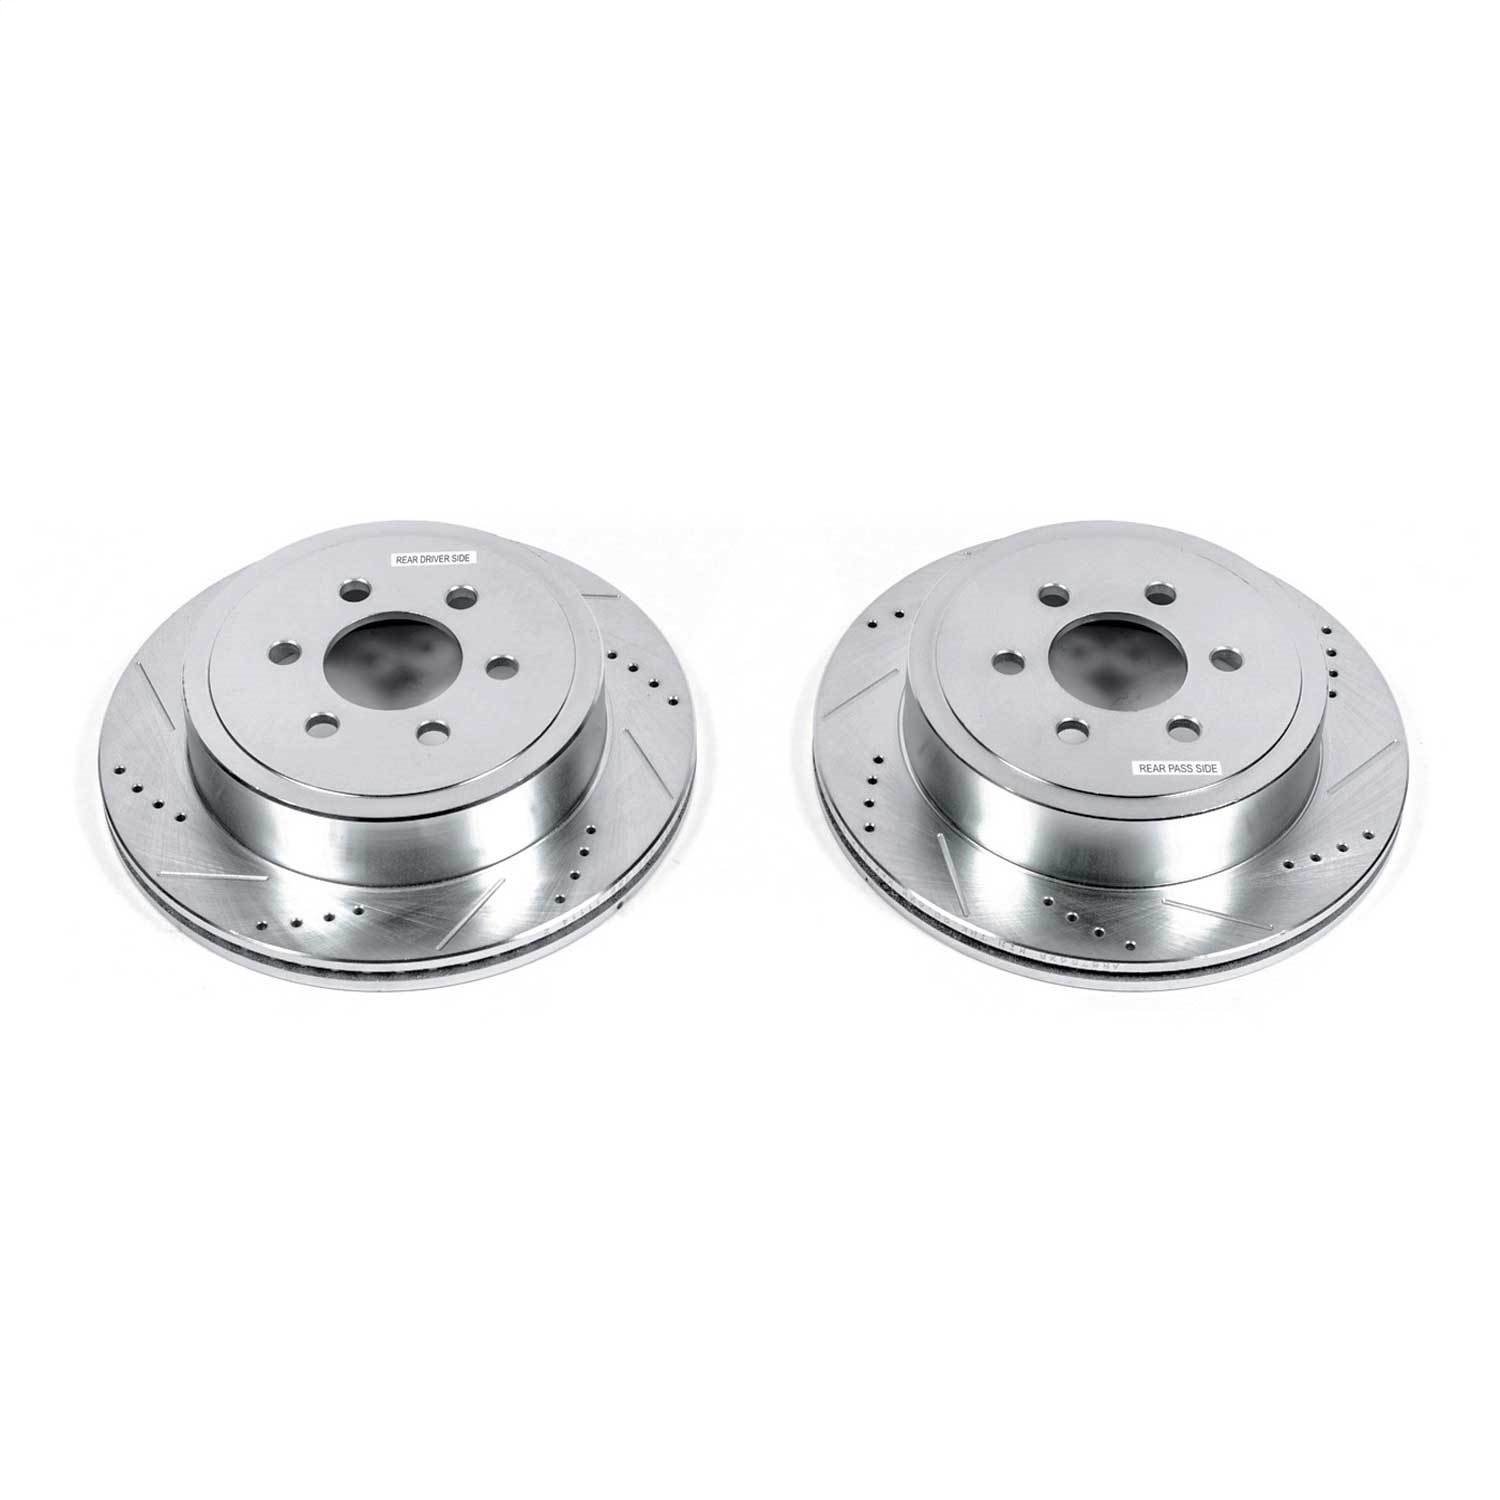 Cross-Drilled and Slotted Brake Rotors Rear Highest Quality G3000 Grade Casting Blanks Zinc-Plated f